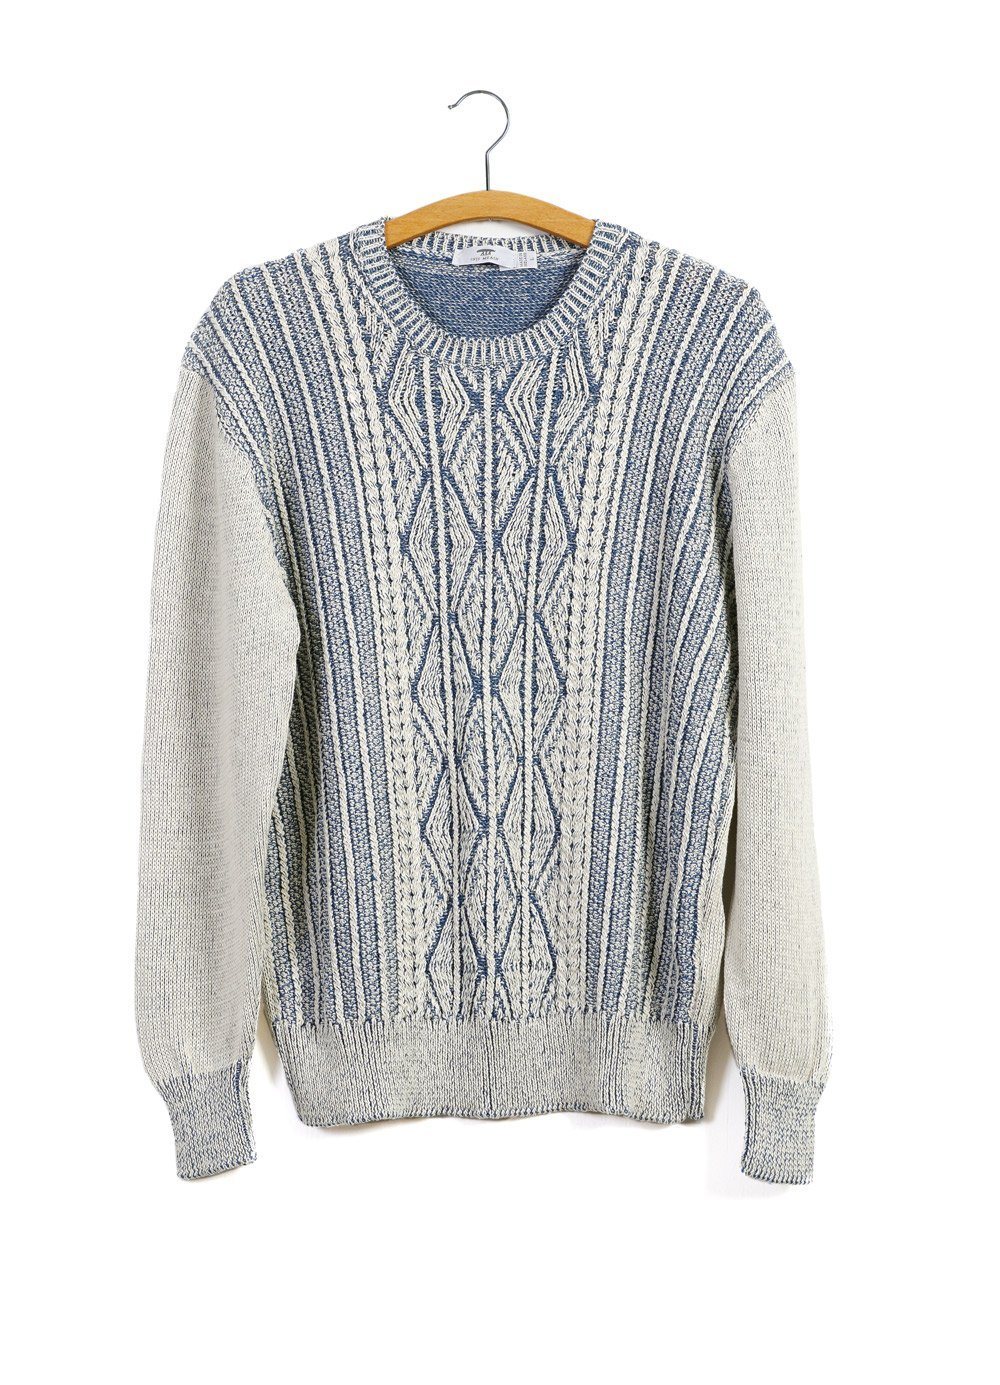 PATENTED ARAN | Cable Knit Sweater | Blue Offwhite | 240€ -Inis Meáin- HANSEN Garments